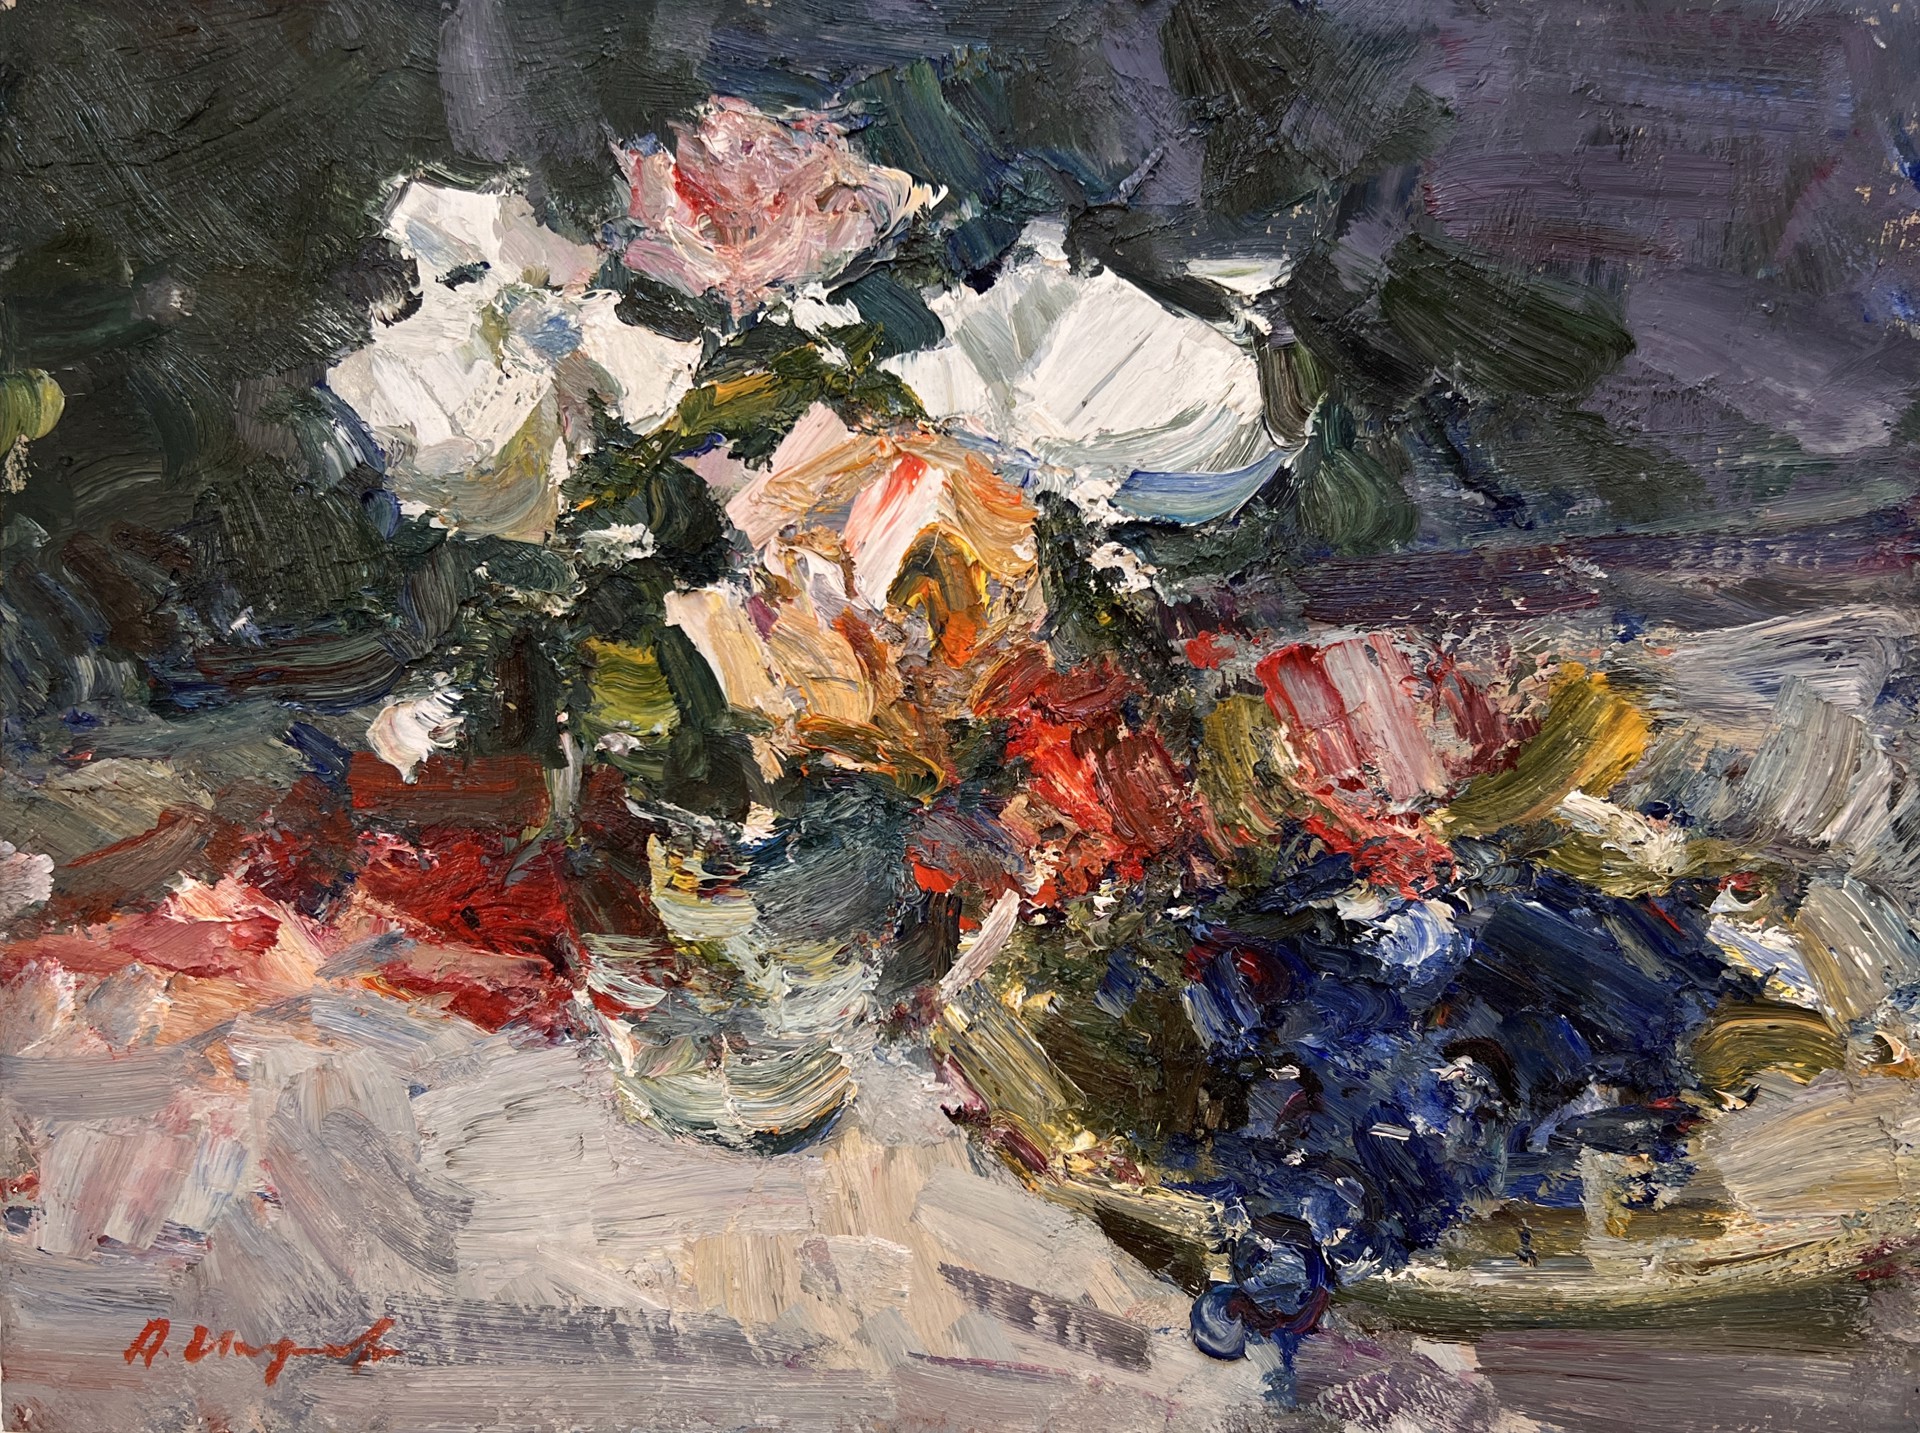 "Roses and Grapes" original oil painting by Andrey Inozemtsev